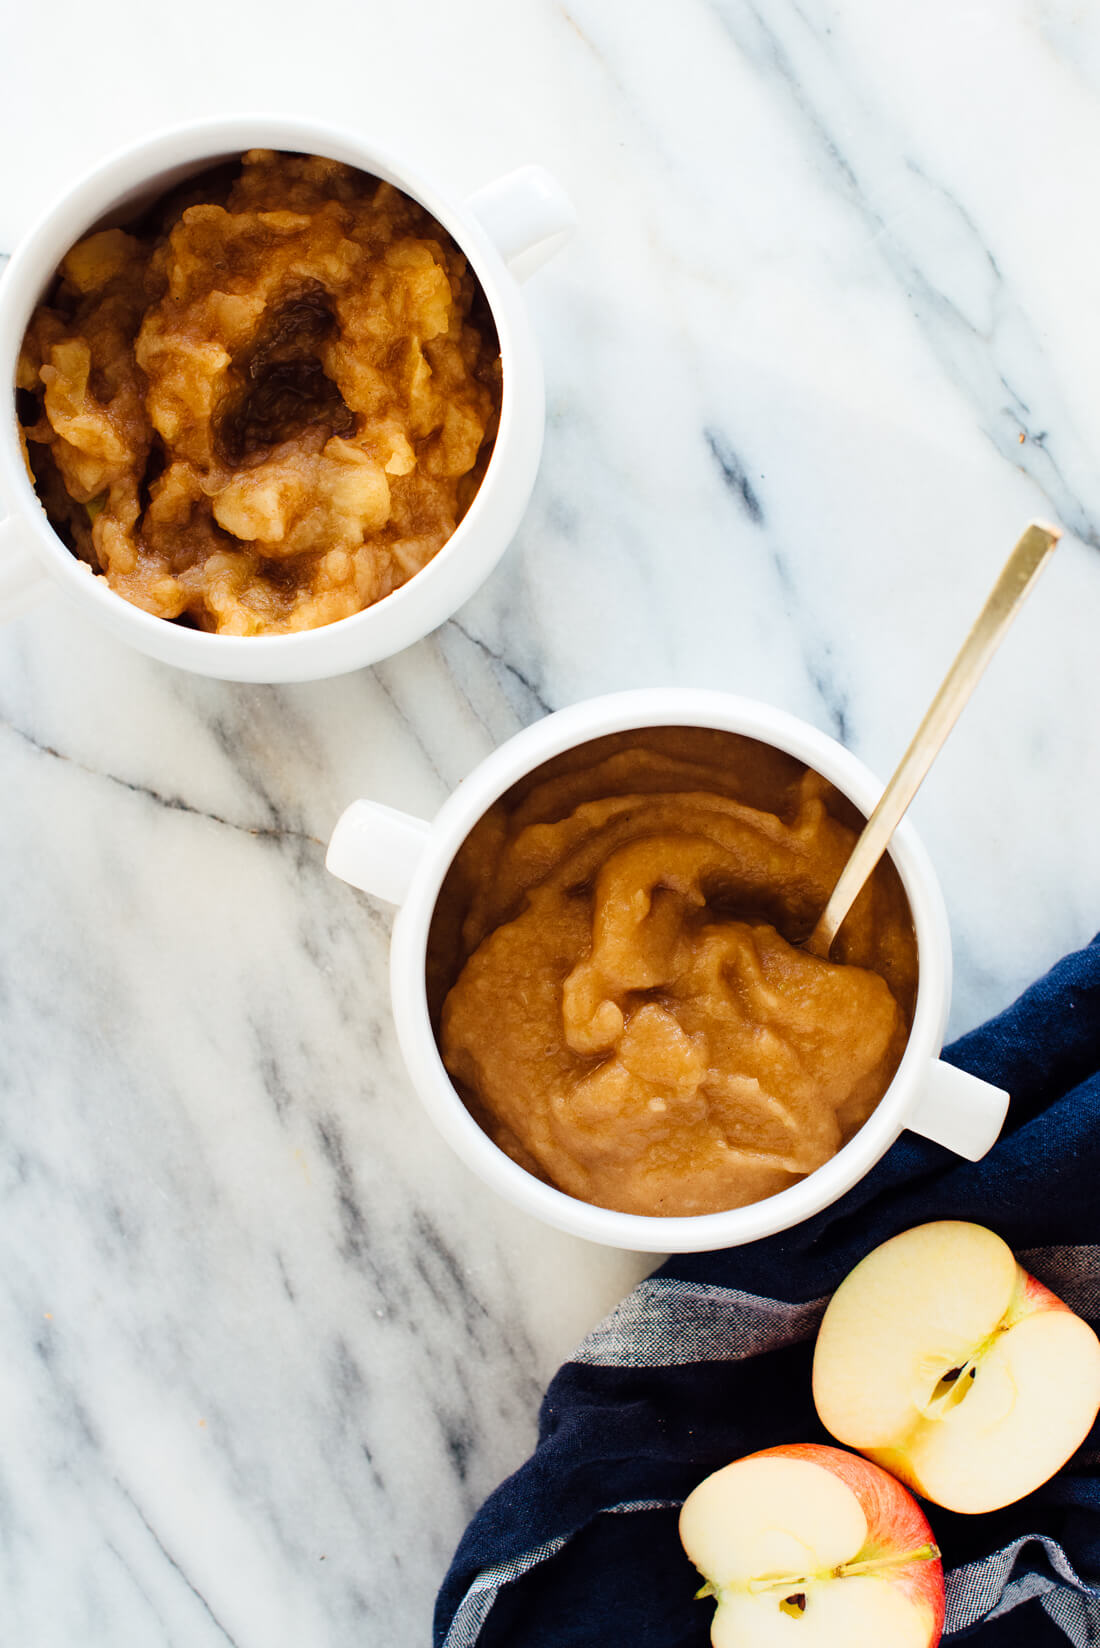 The best homemade applesauce! This applesauce recipe is naturally sweetened with maple syrup and tastes like the inside of an apple crisp! #healthy